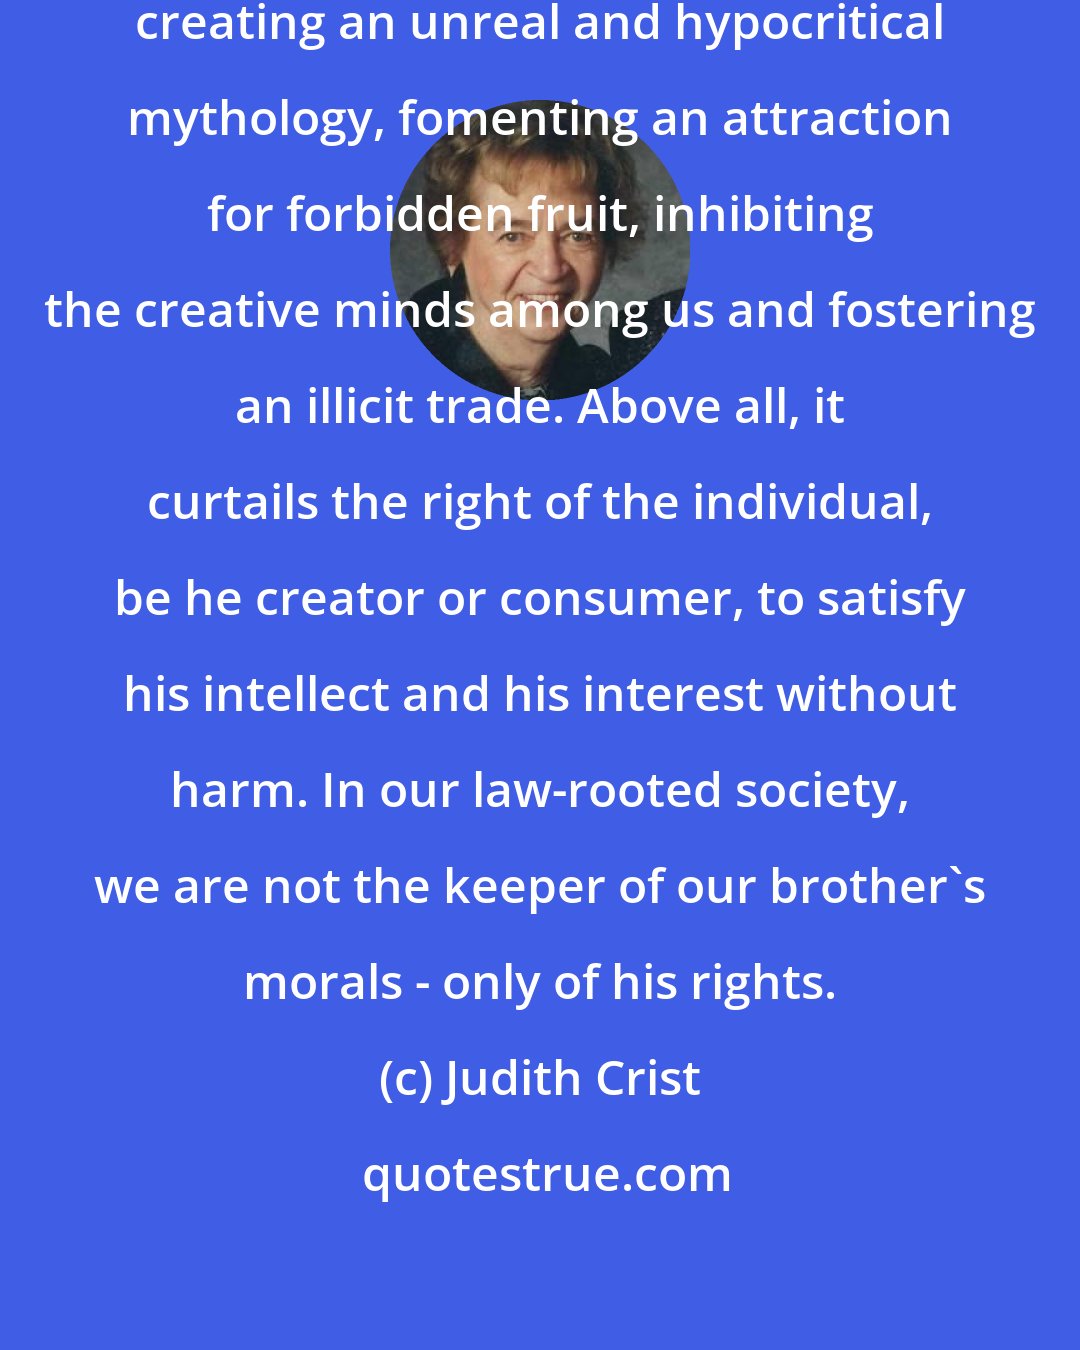 Judith Crist: What censorship accomplishes, creating an unreal and hypocritical mythology, fomenting an attraction for forbidden fruit, inhibiting the creative minds among us and fostering an illicit trade. Above all, it curtails the right of the individual, be he creator or consumer, to satisfy his intellect and his interest without harm. In our law-rooted society, we are not the keeper of our brother's morals - only of his rights.